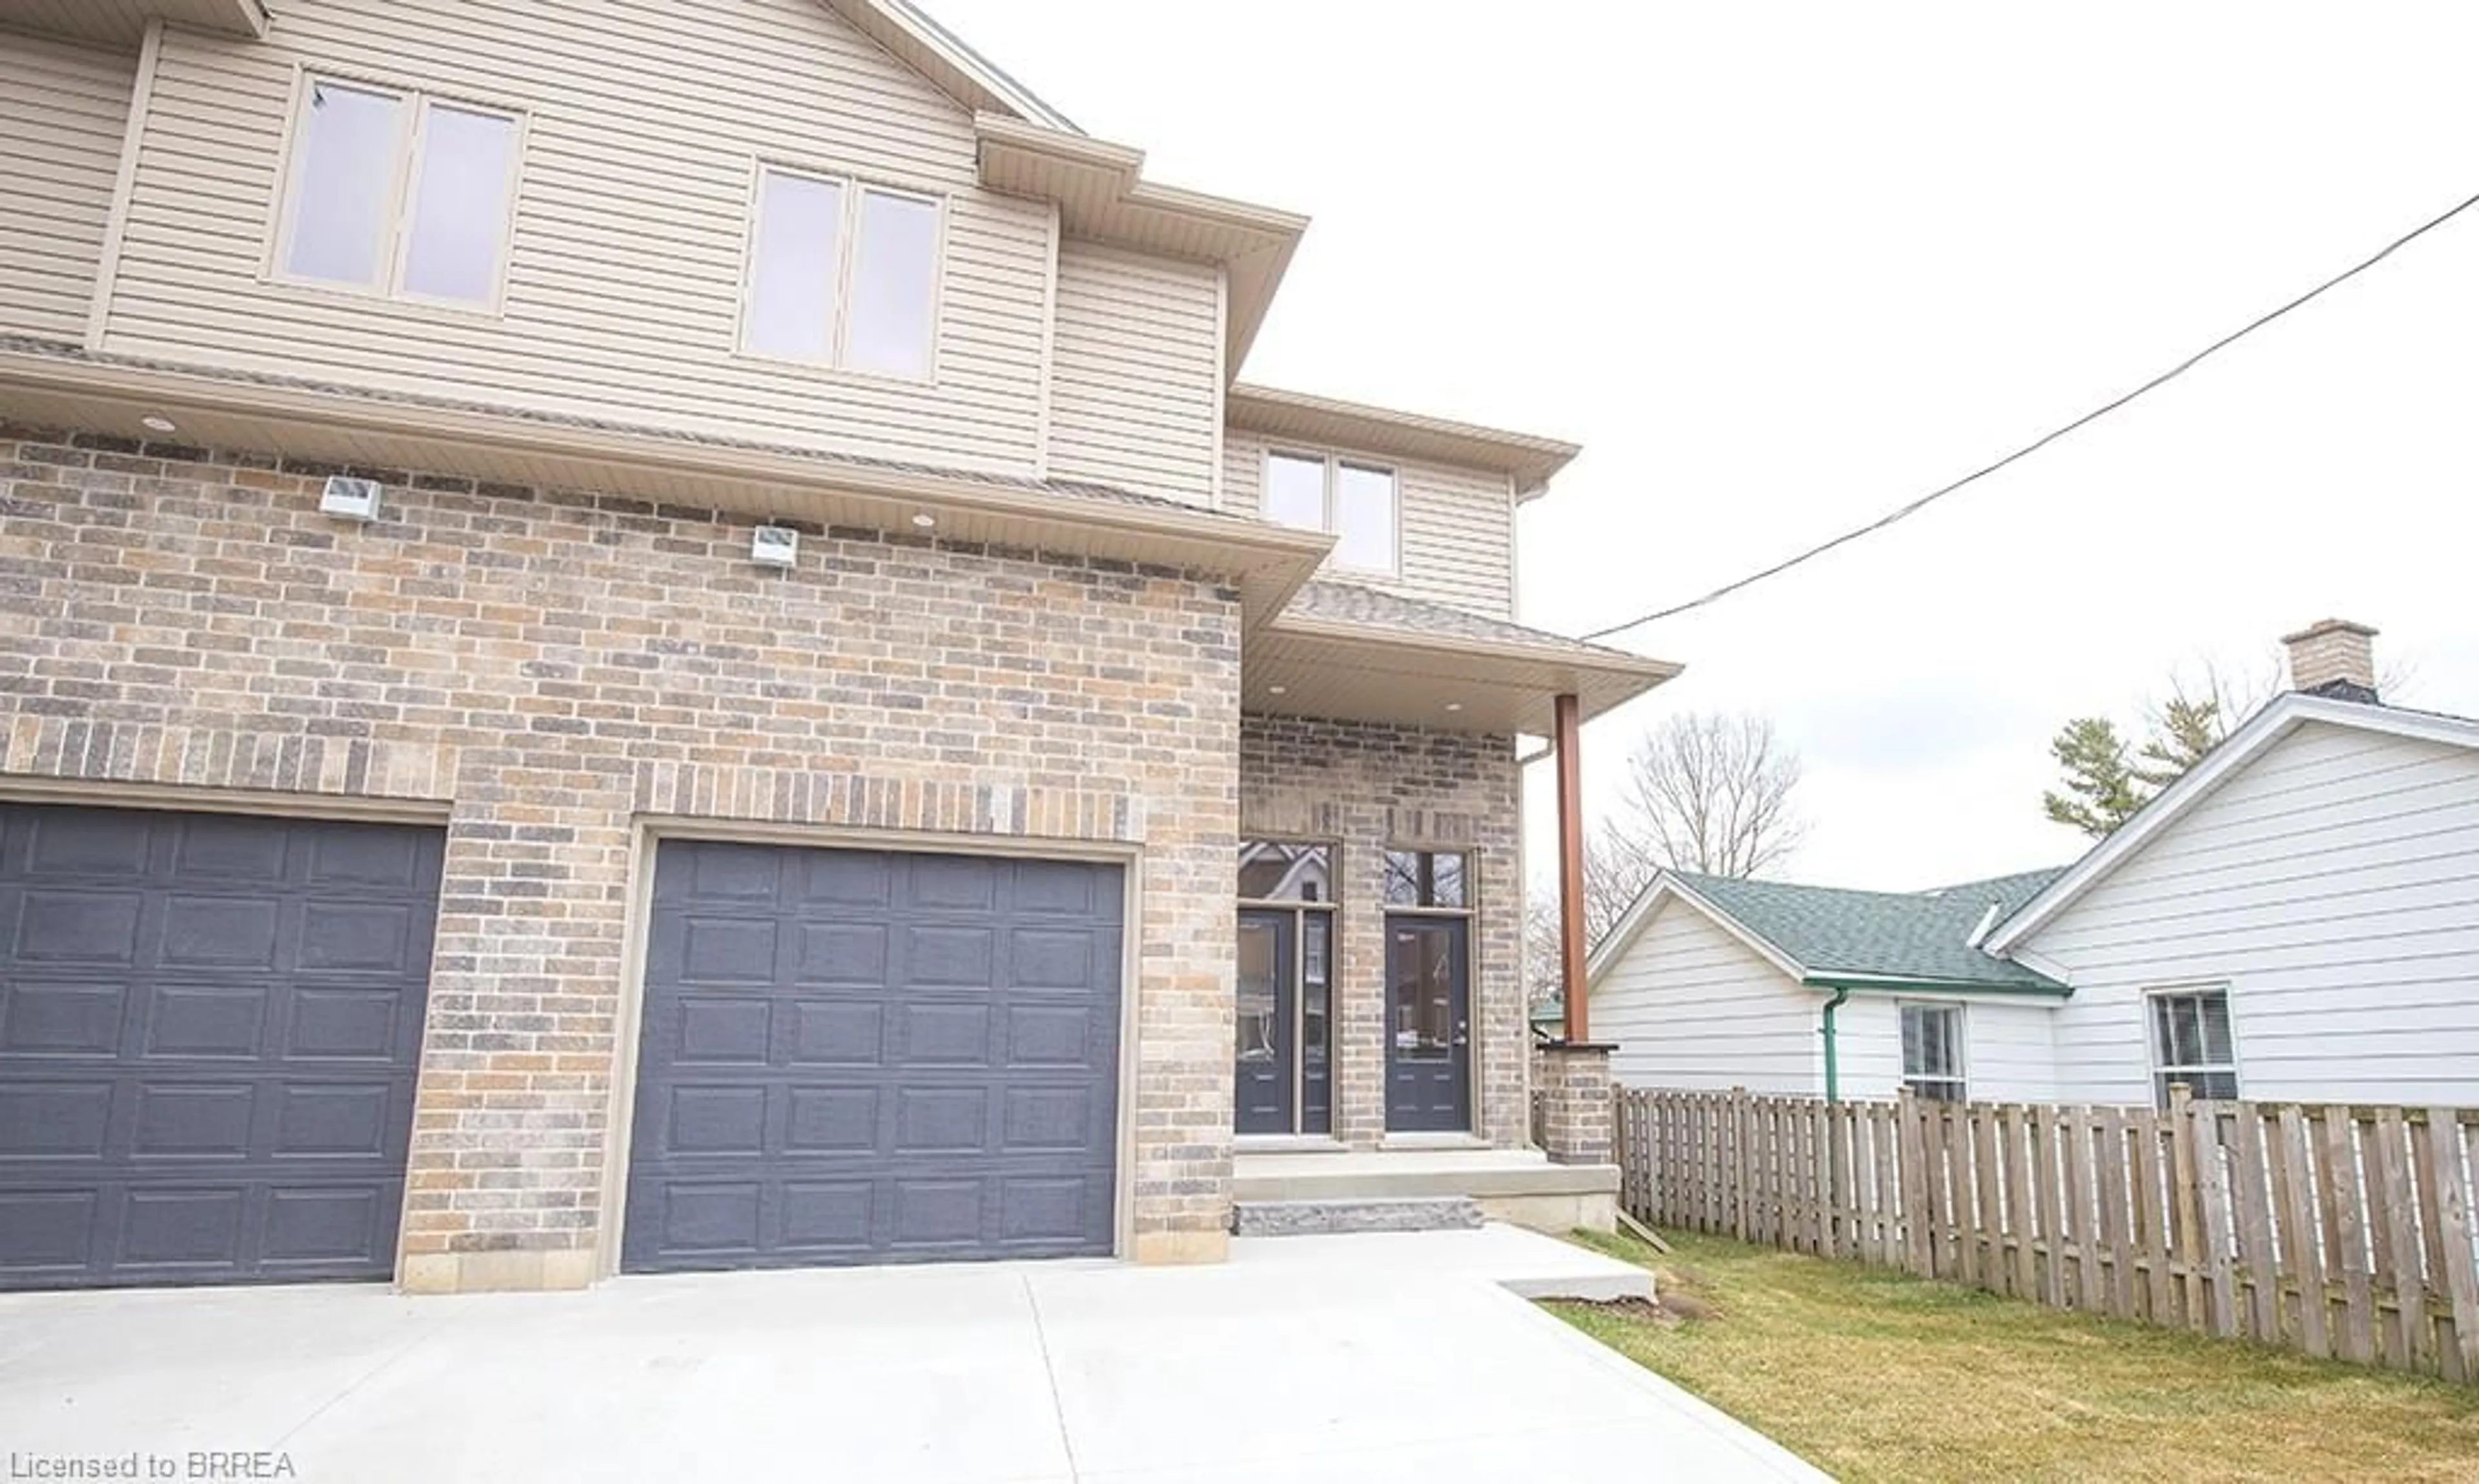 Home with brick exterior material for 144 Mary St, Brantford Ontario N3S 3B9